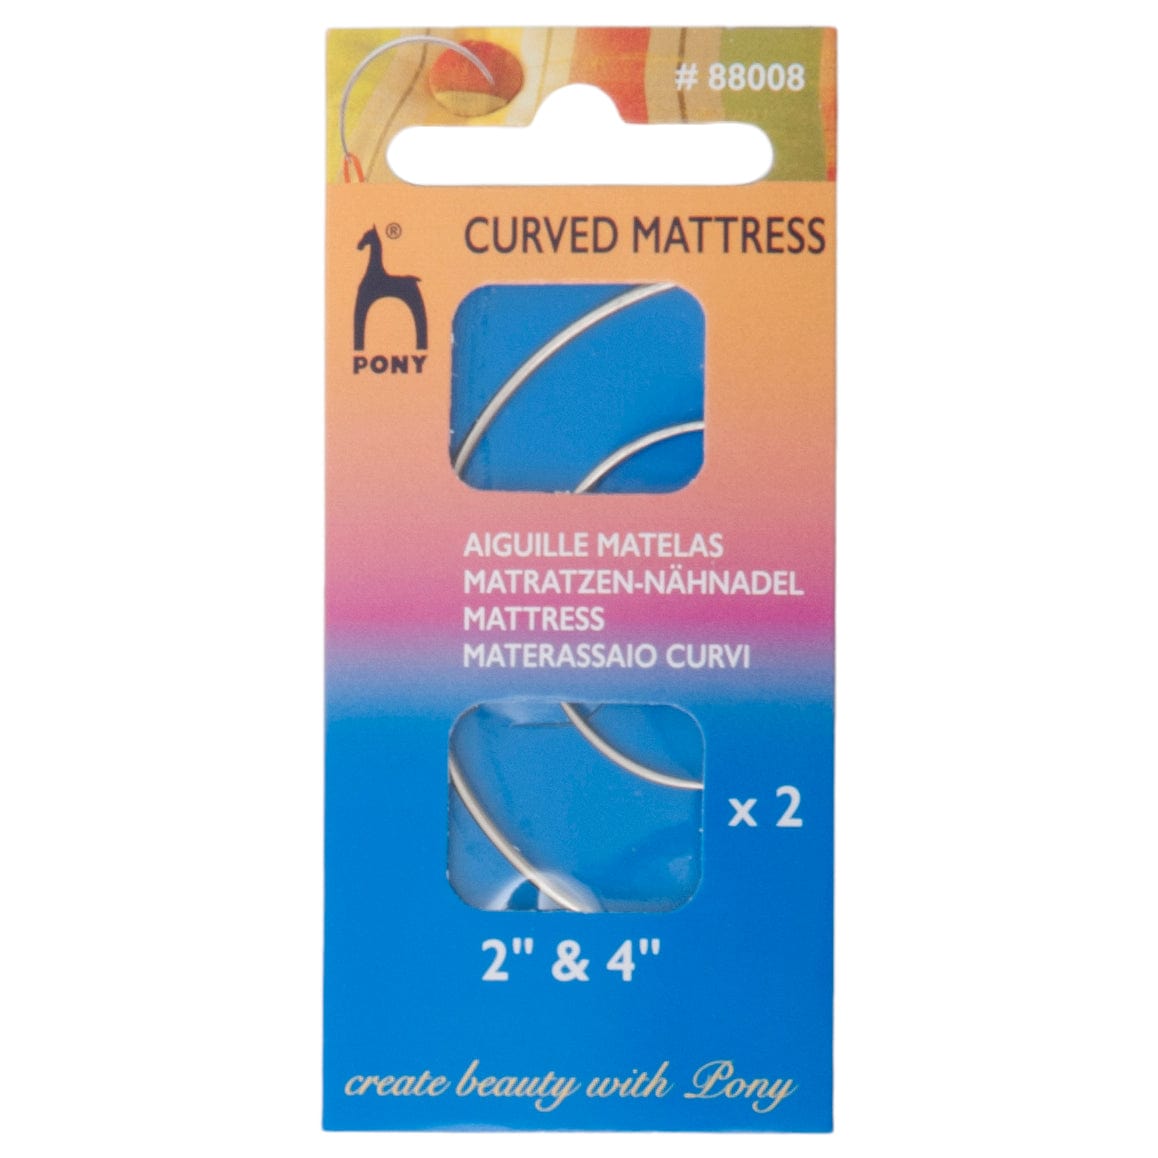 Hand Sewing Needles: Curved mattress needle